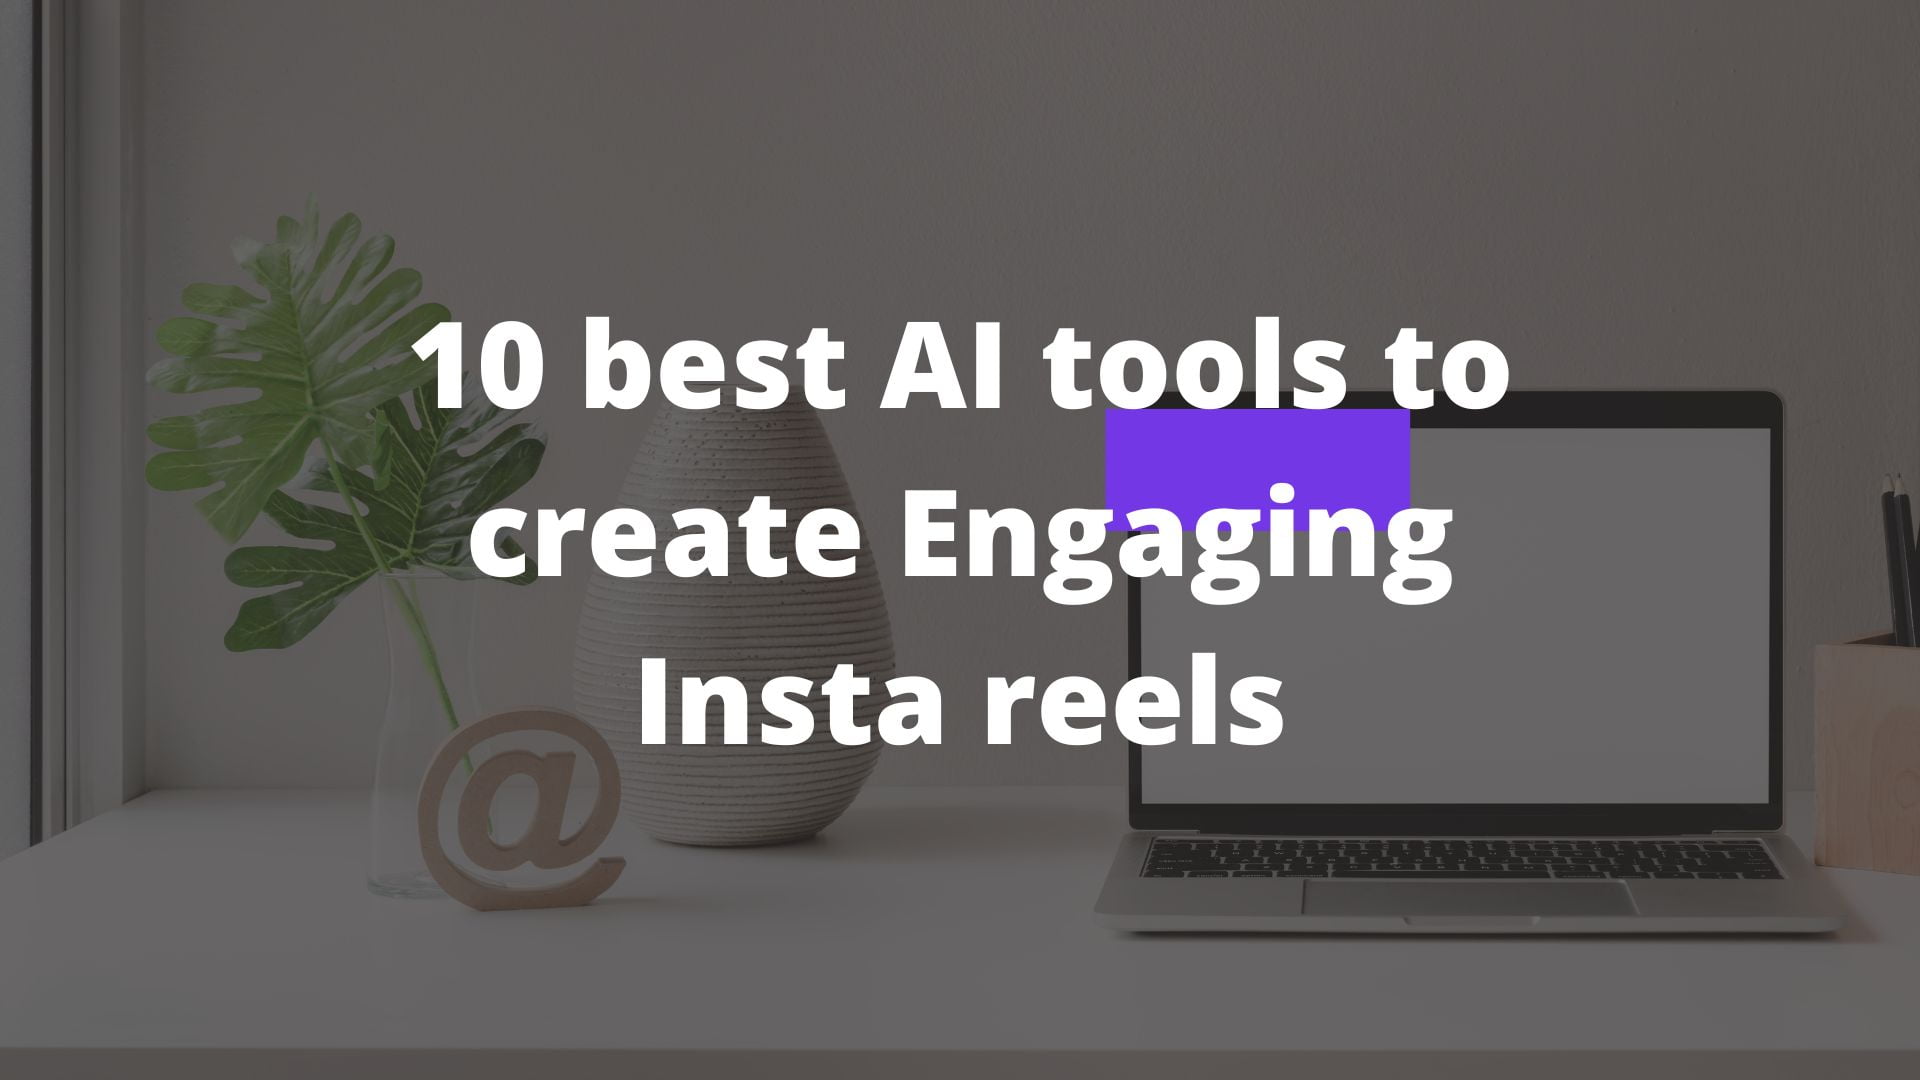 10 best AI tools to create Engaging Insta reels